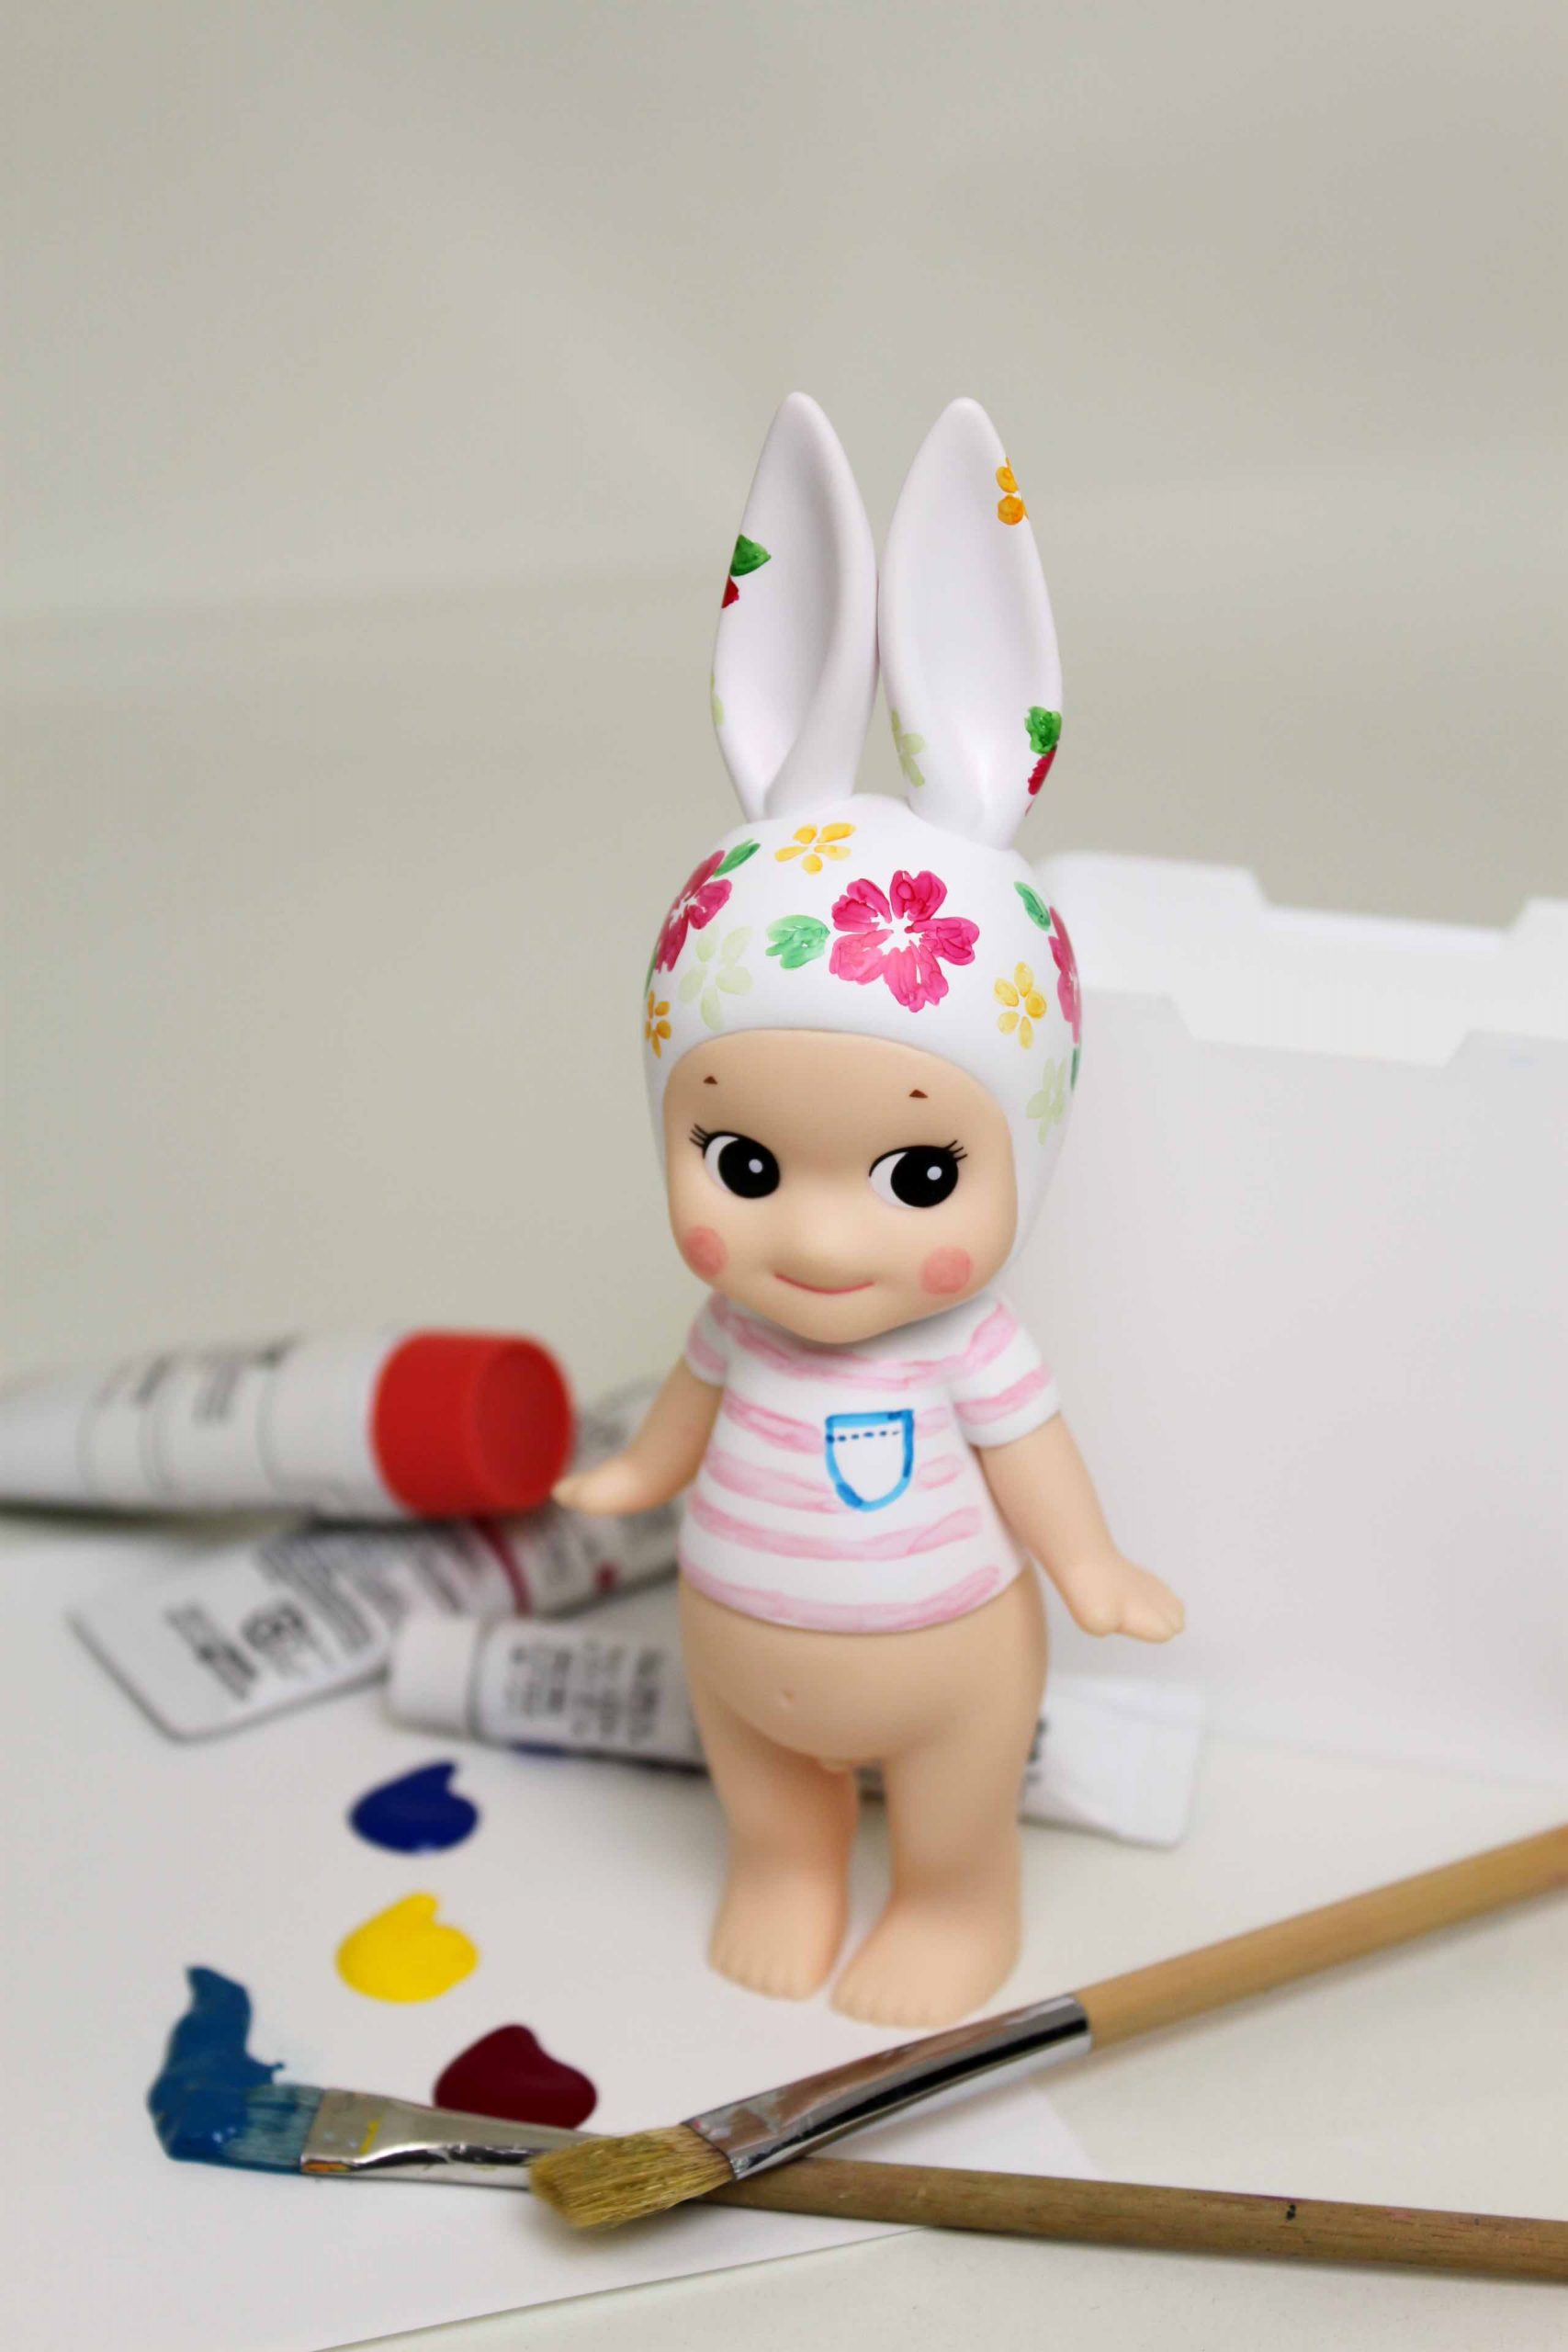 , Hands’ Character Festival has 20th anniversary Sonny Angel dolls and painting workshops